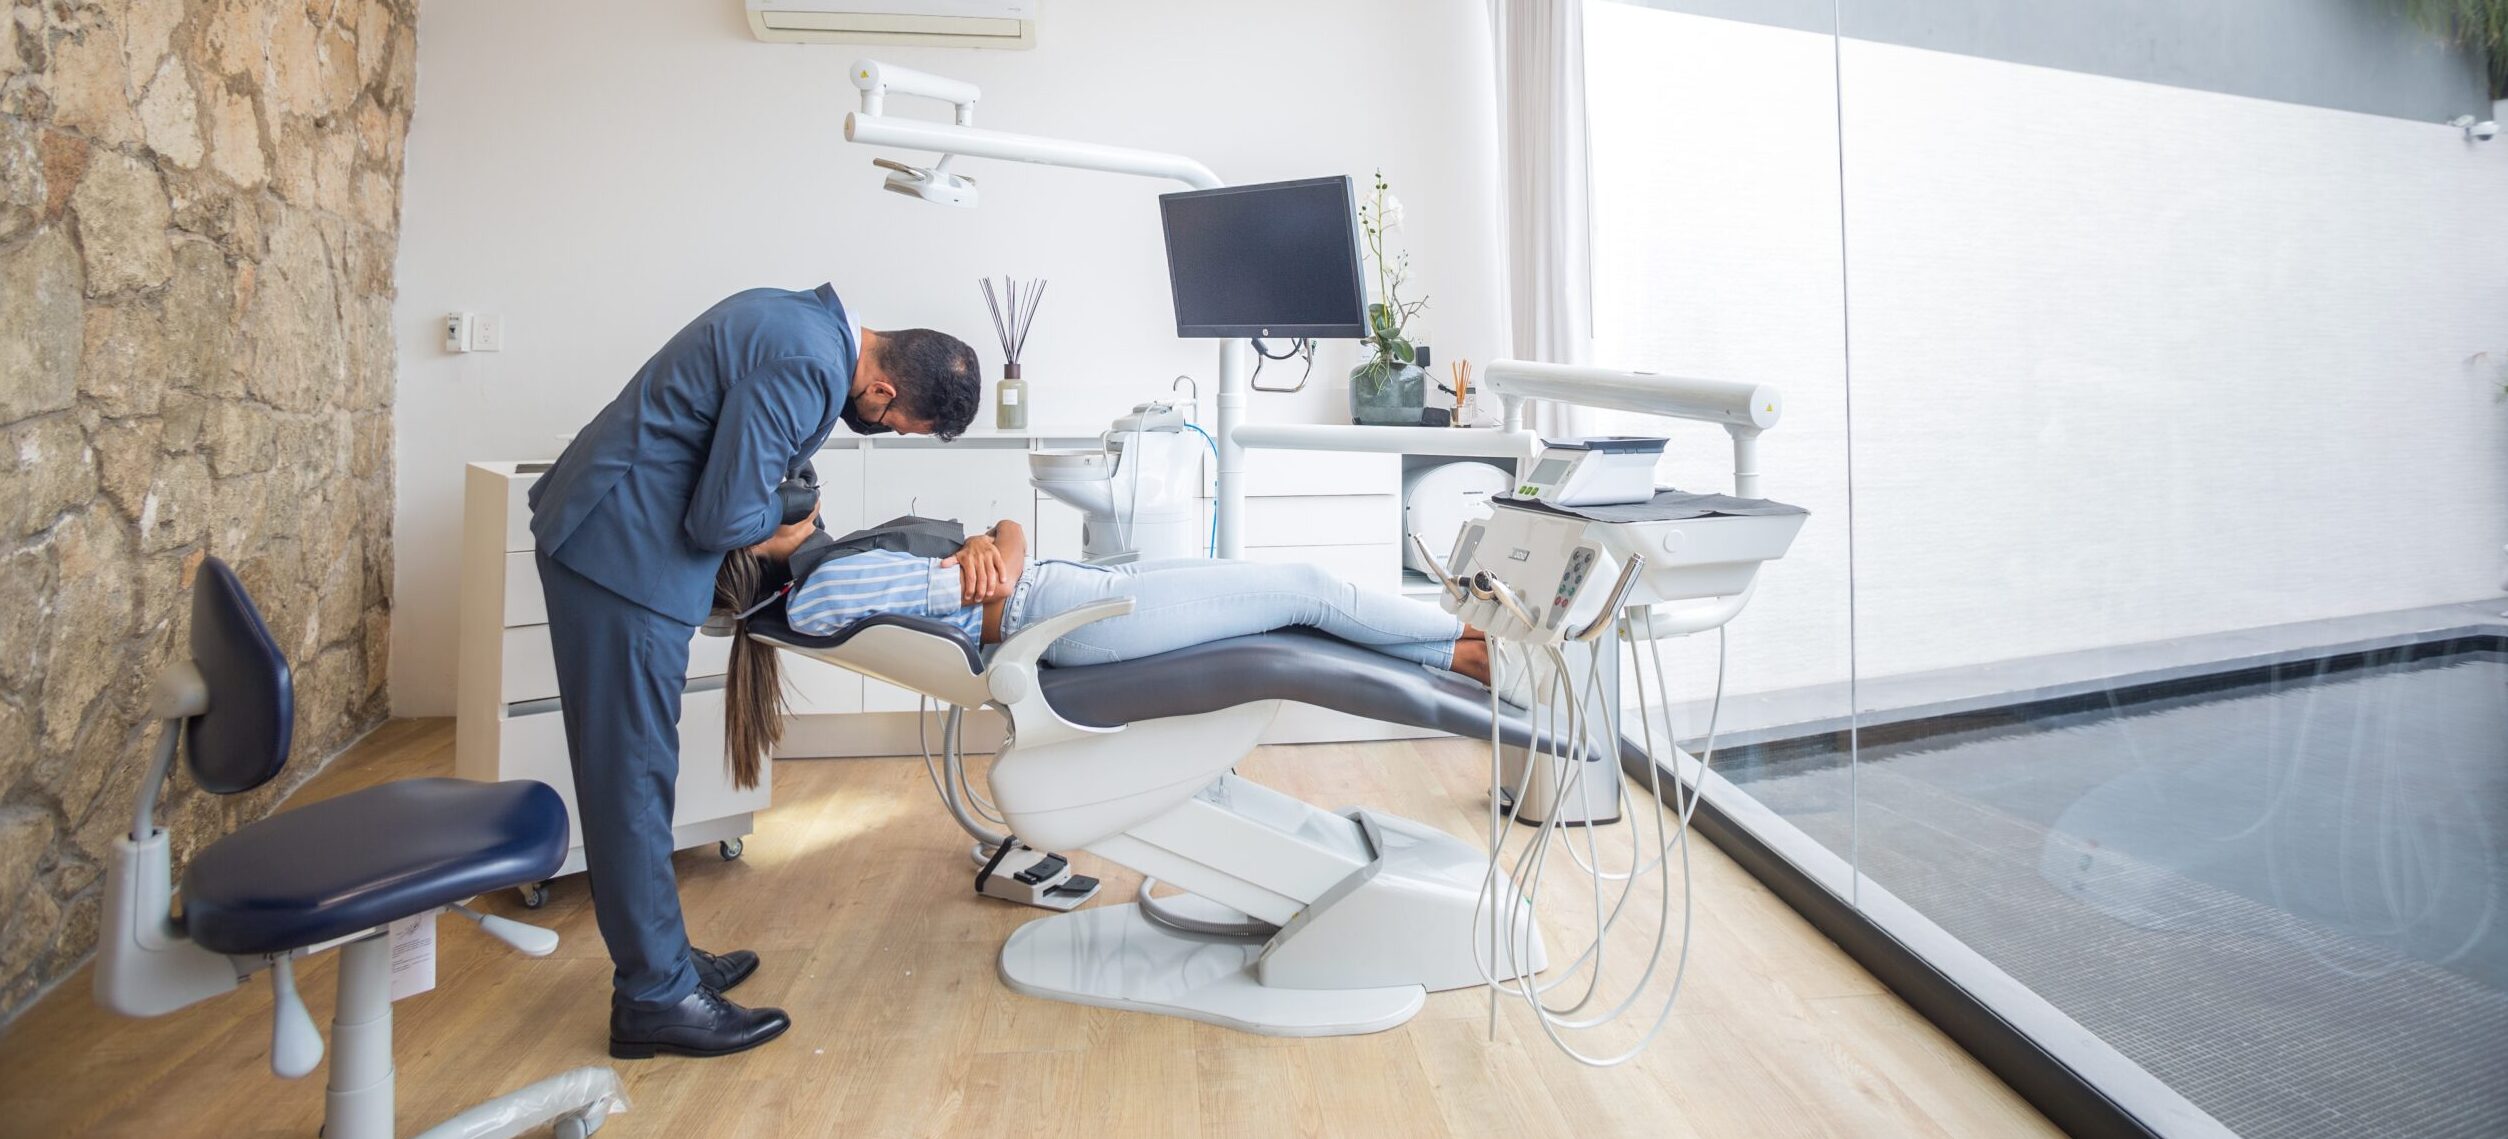 Image of a professional dental practice in Canada